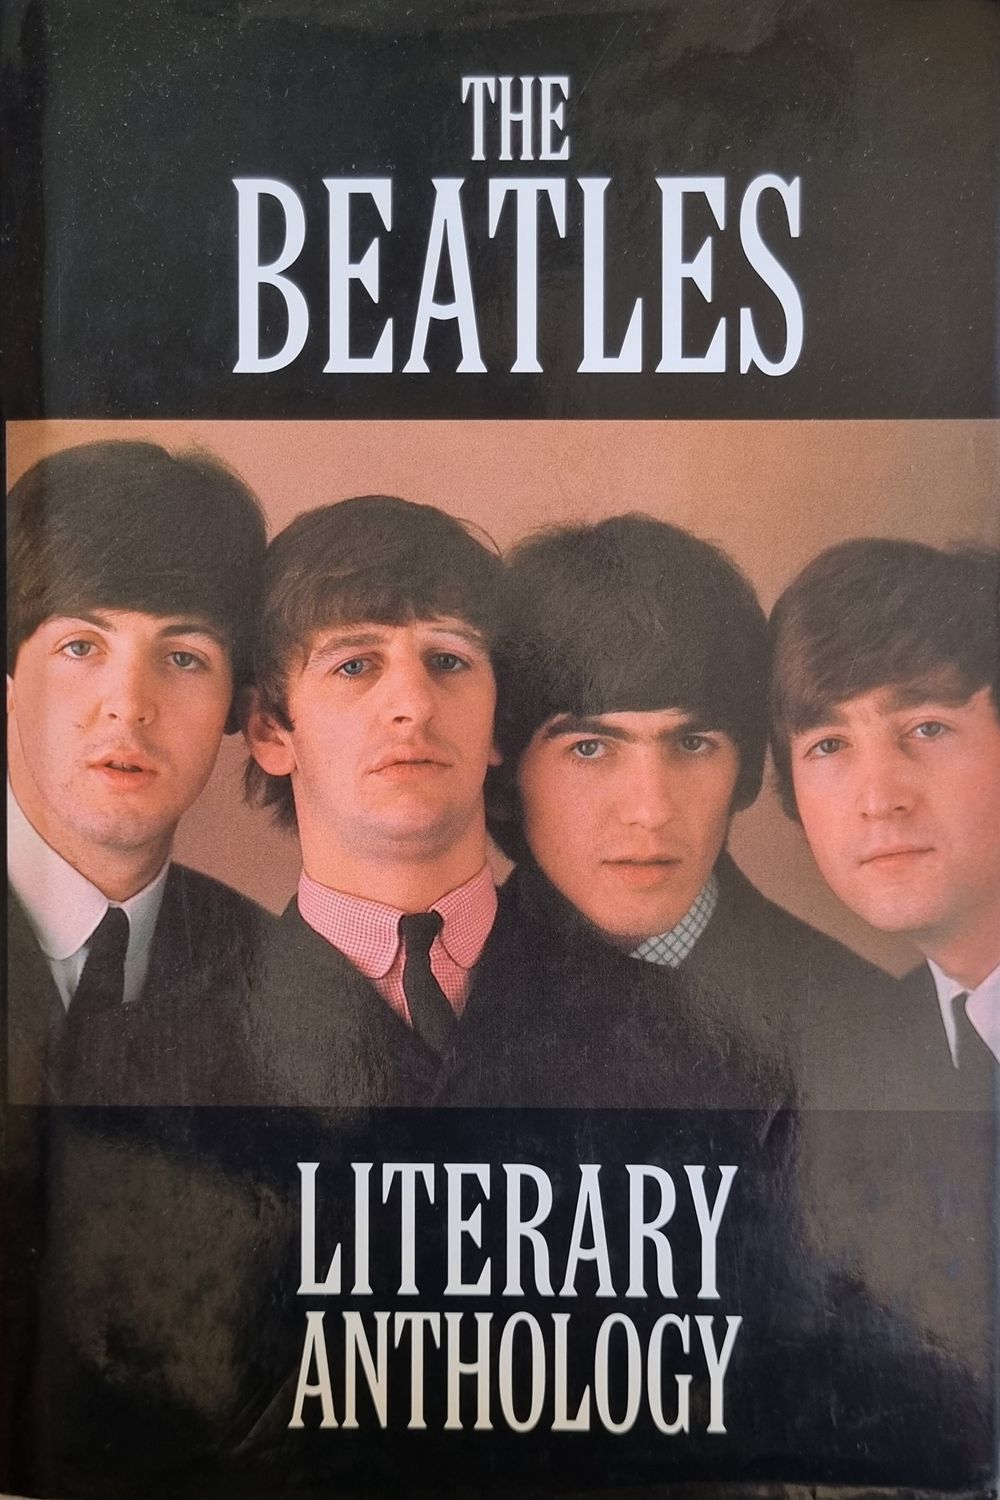 Beatles Literary Anthology by Mike Evans [2003]